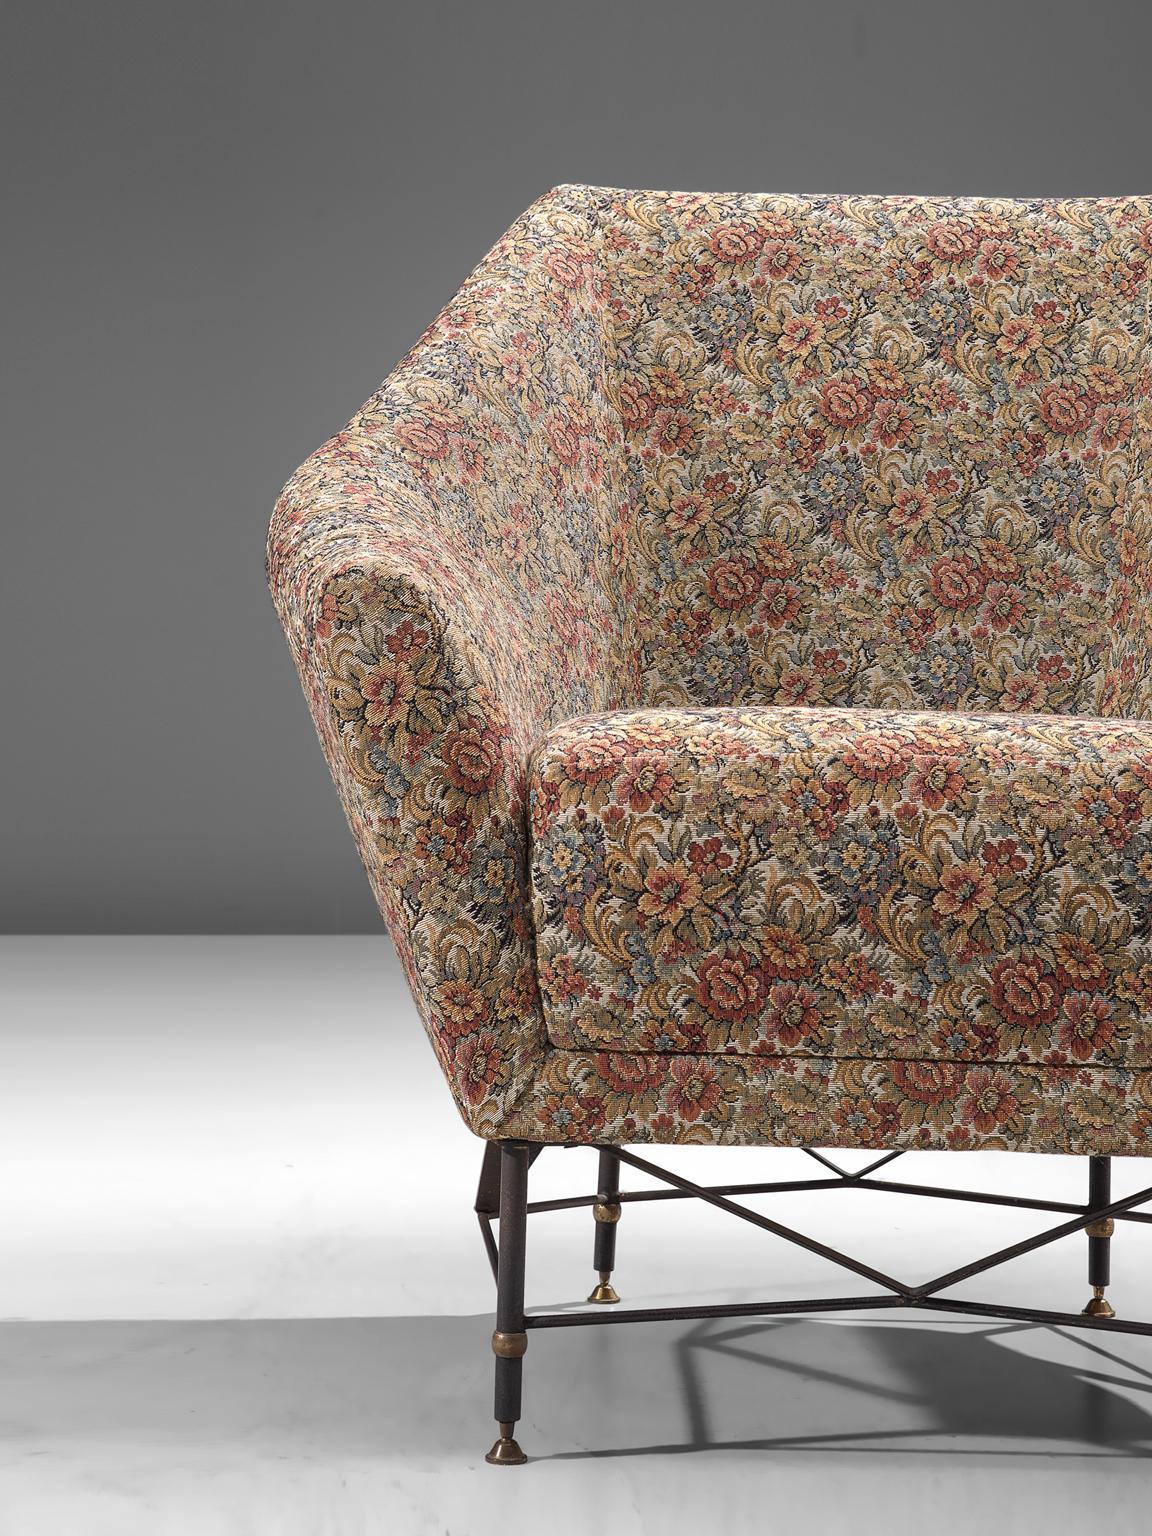 Mid-20th Century Italian Pair of Lounge Chairs in Floral Upholstery